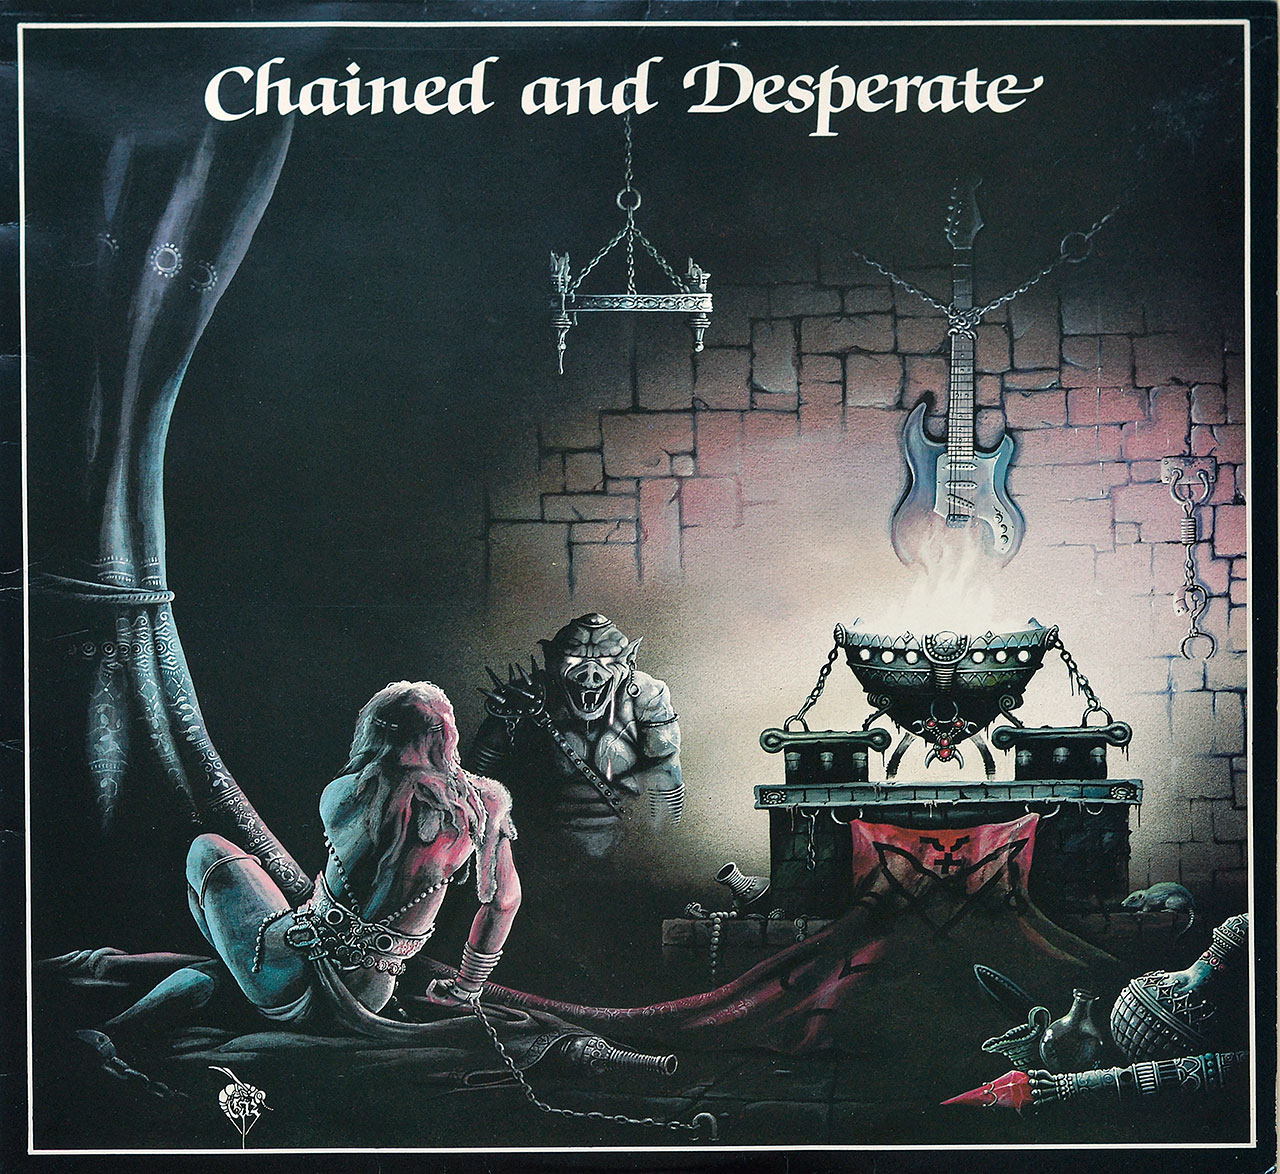 The artwork features a captivating scene that combines elements of fantasy and rebellion. At the forefront, a chained figure, presumably symbolic of the desperation alluded to in the album title, stands against a backdrop of a desolate and ominous landscape. The chains that bind the figure suggest themes of struggle and resistance, echoing the rebellious spirit often associated with NWOBHM.
